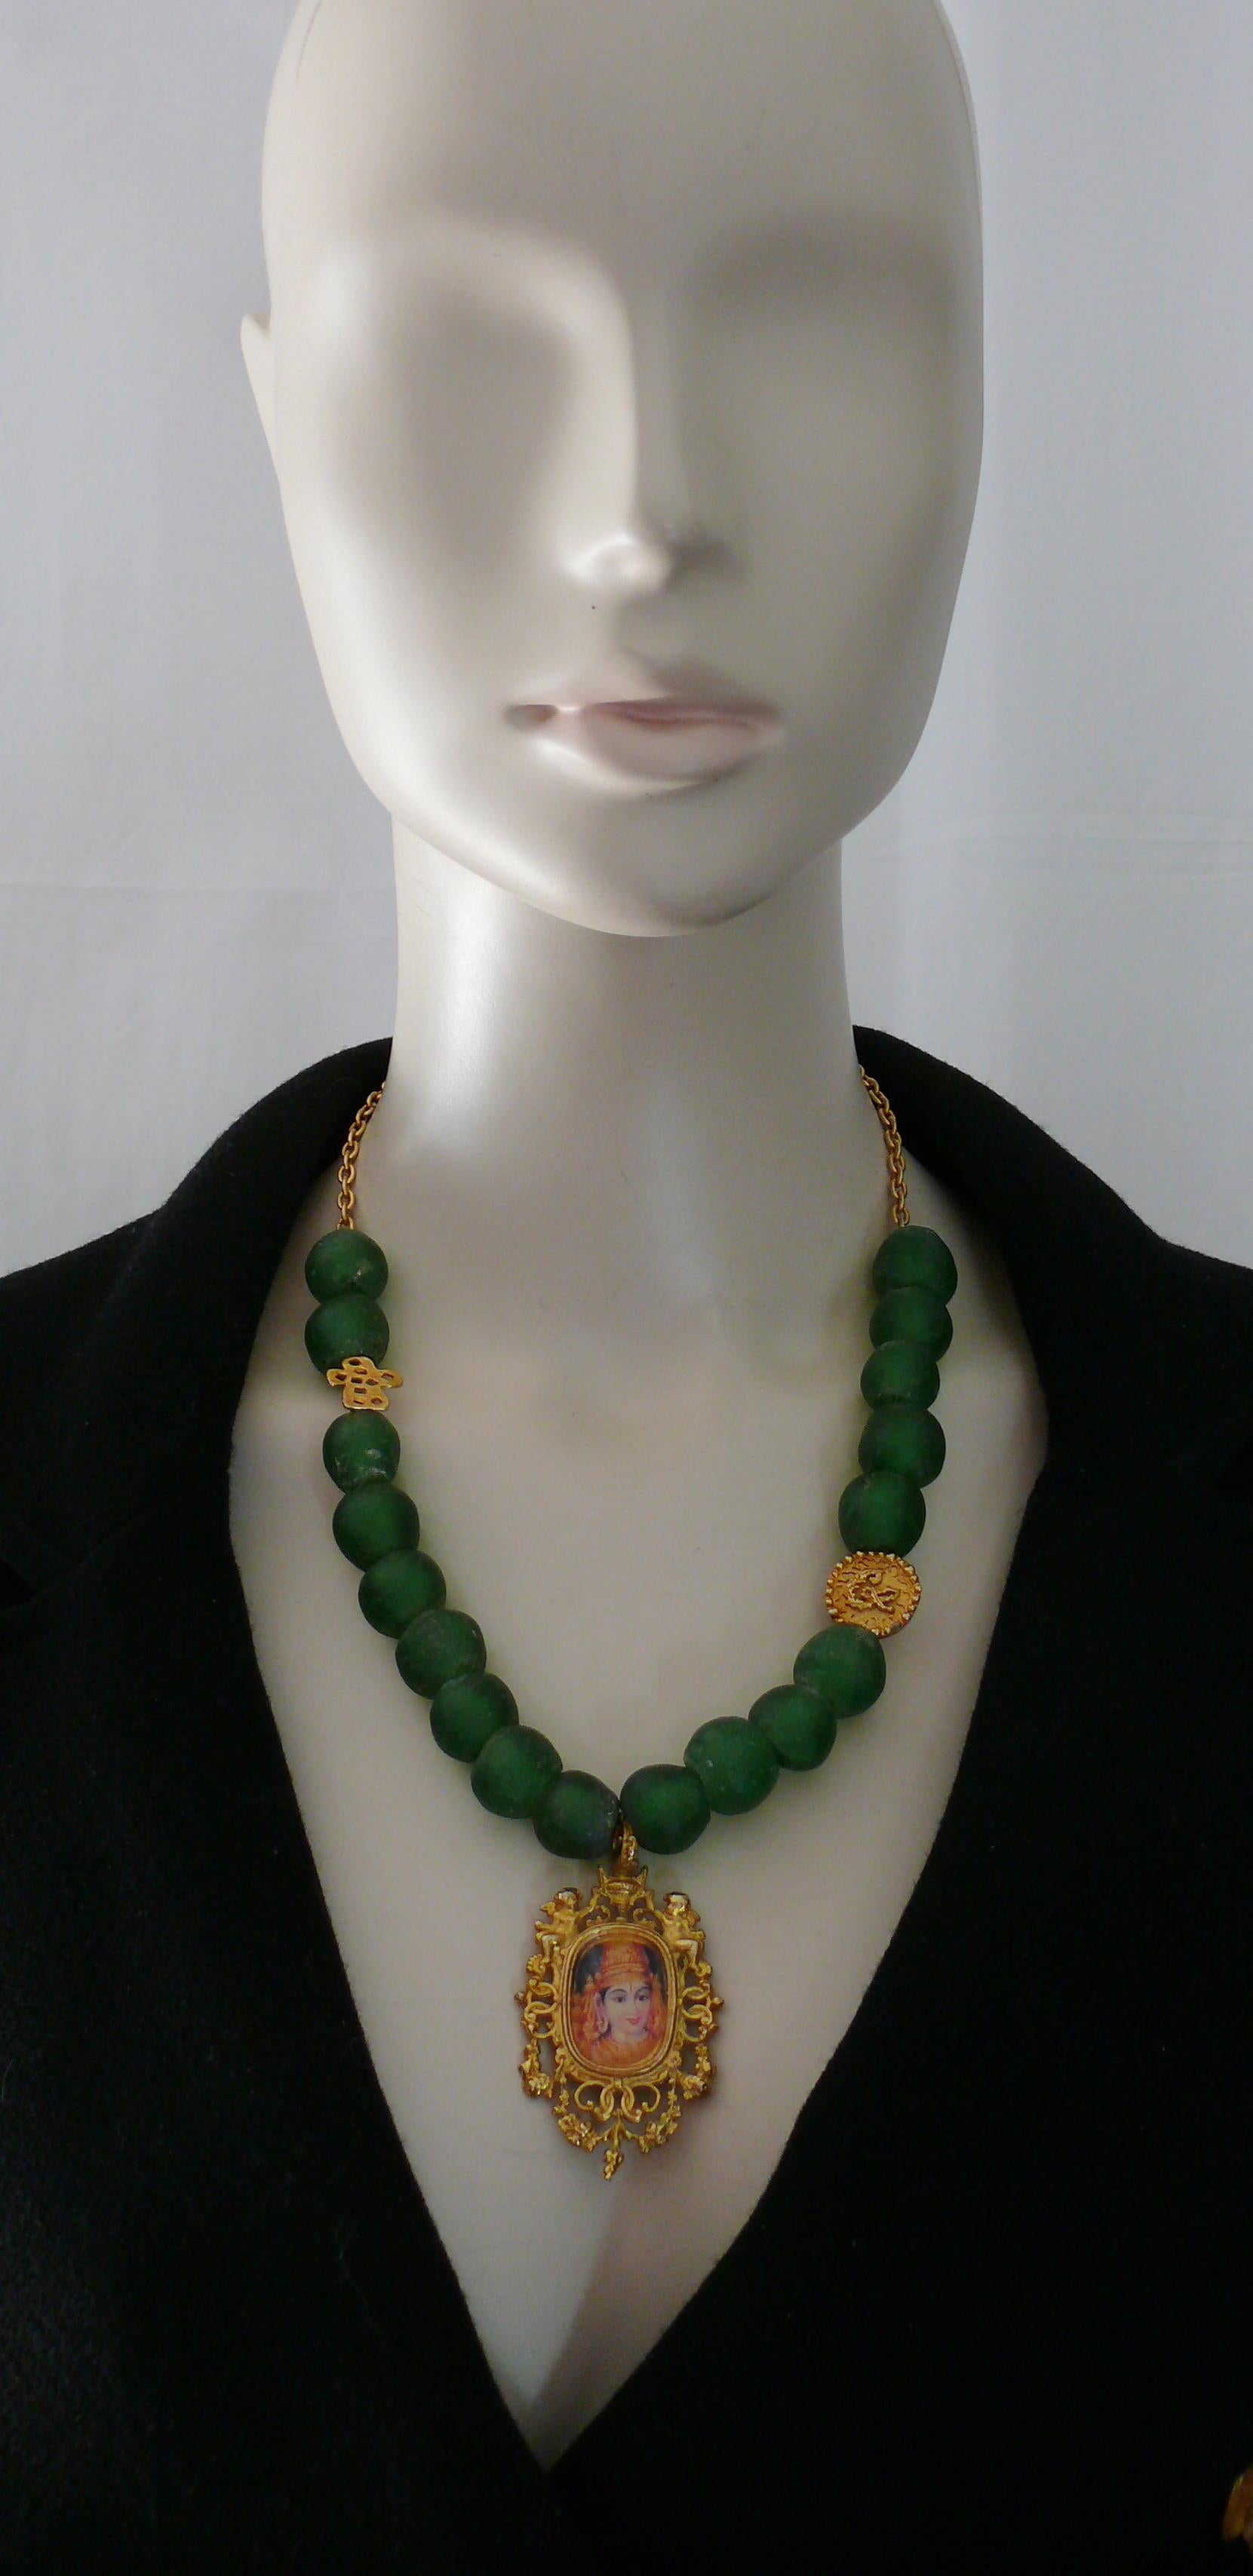 CHRISTIAN LACROIX vintage necklace made of antique like green glass frosted beads featuring an Hindu deity printed portrait in a gold toned baroque medallion, a cross and CL monogram textured coin.

T bar and toggle closure.

Embossed CHRISTIAN